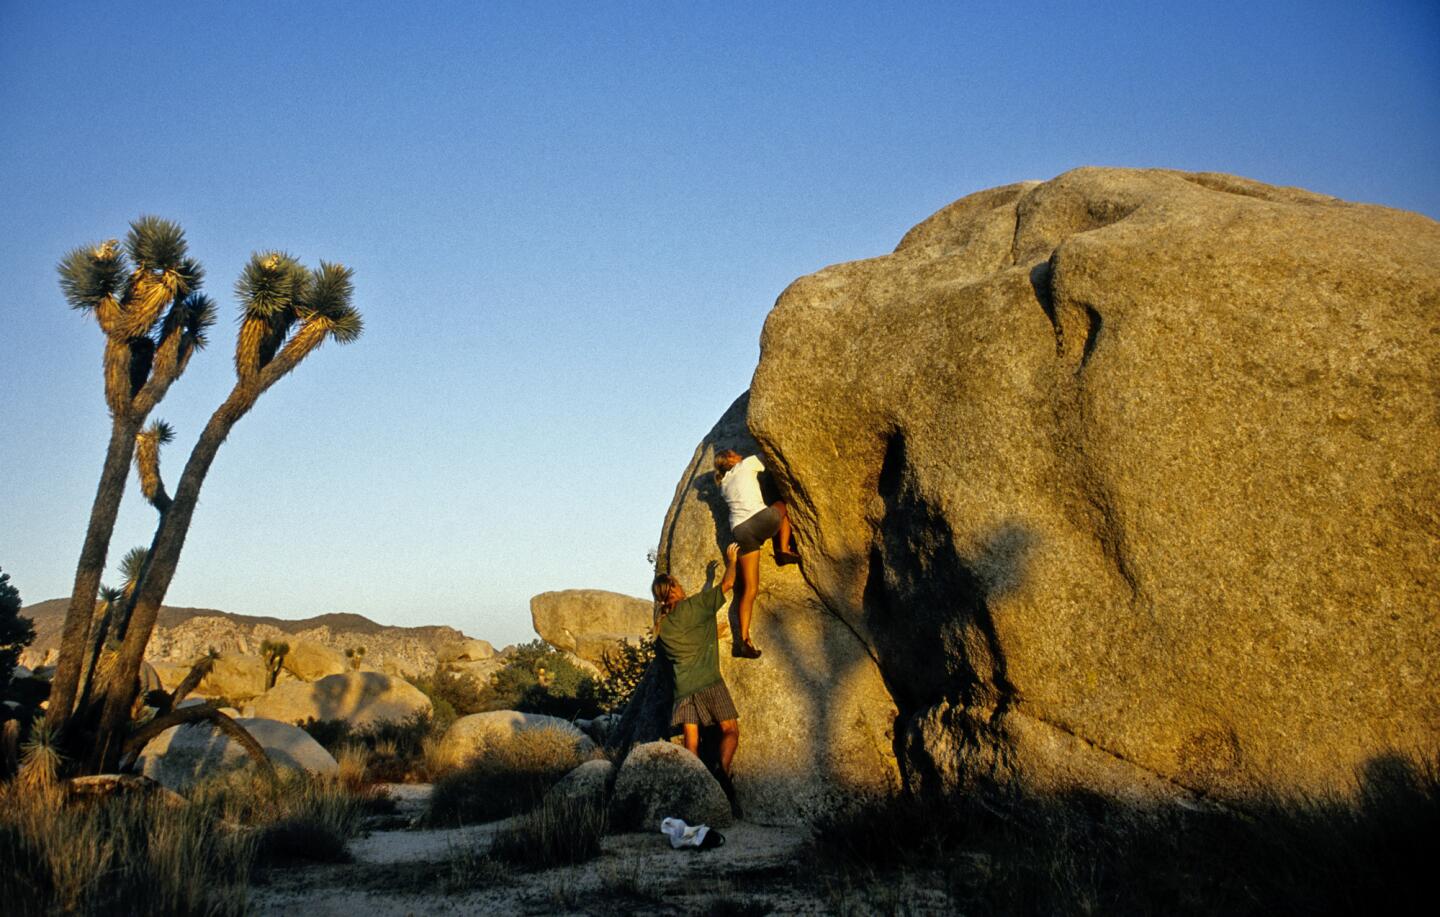 Spectacular granite formations, plus unique desert plants, make Joshua Tree National Park a rock star. The evening sky astounds visitors with its brilliance. A favorite spot is Hidden Valley.